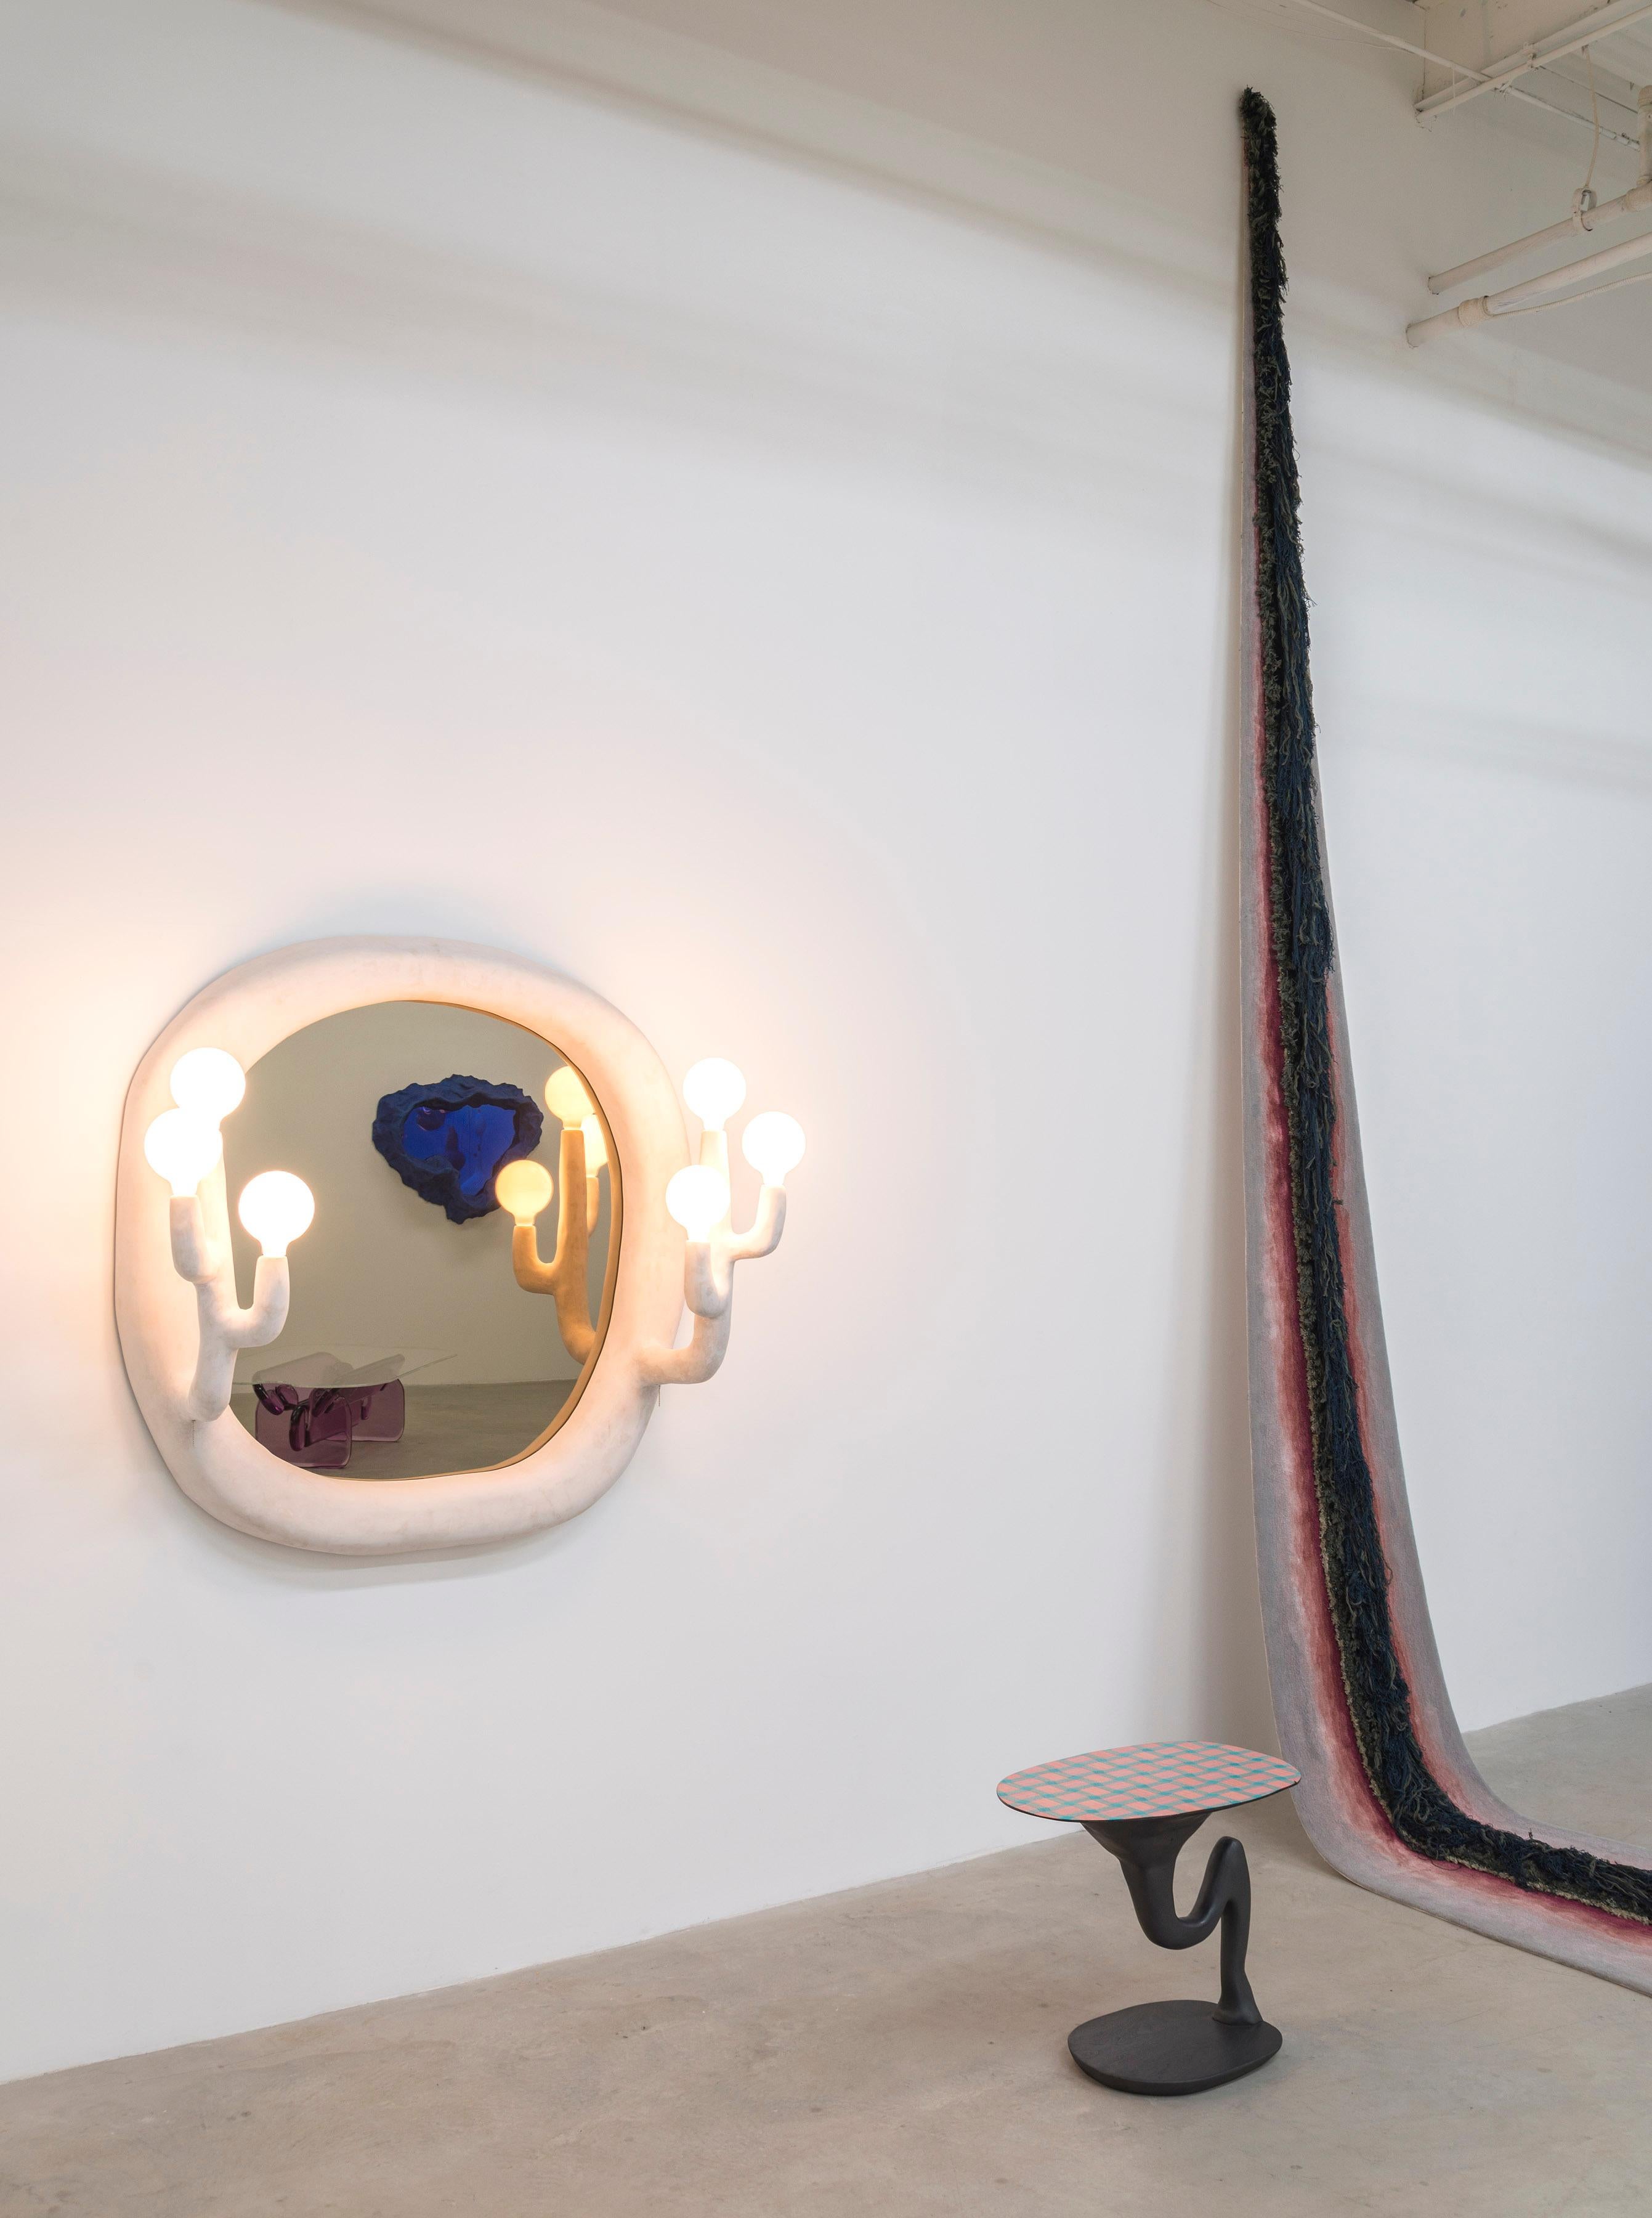 Bronze mirror framed in resin covered foam with two, three-lamp sconces at either end.

1st piece (mirror) title of work: Trinitys / materials: Foam, resin, tinted resin, bronze mirror, electrical components / Size: 48”x 48” x 18” deep /